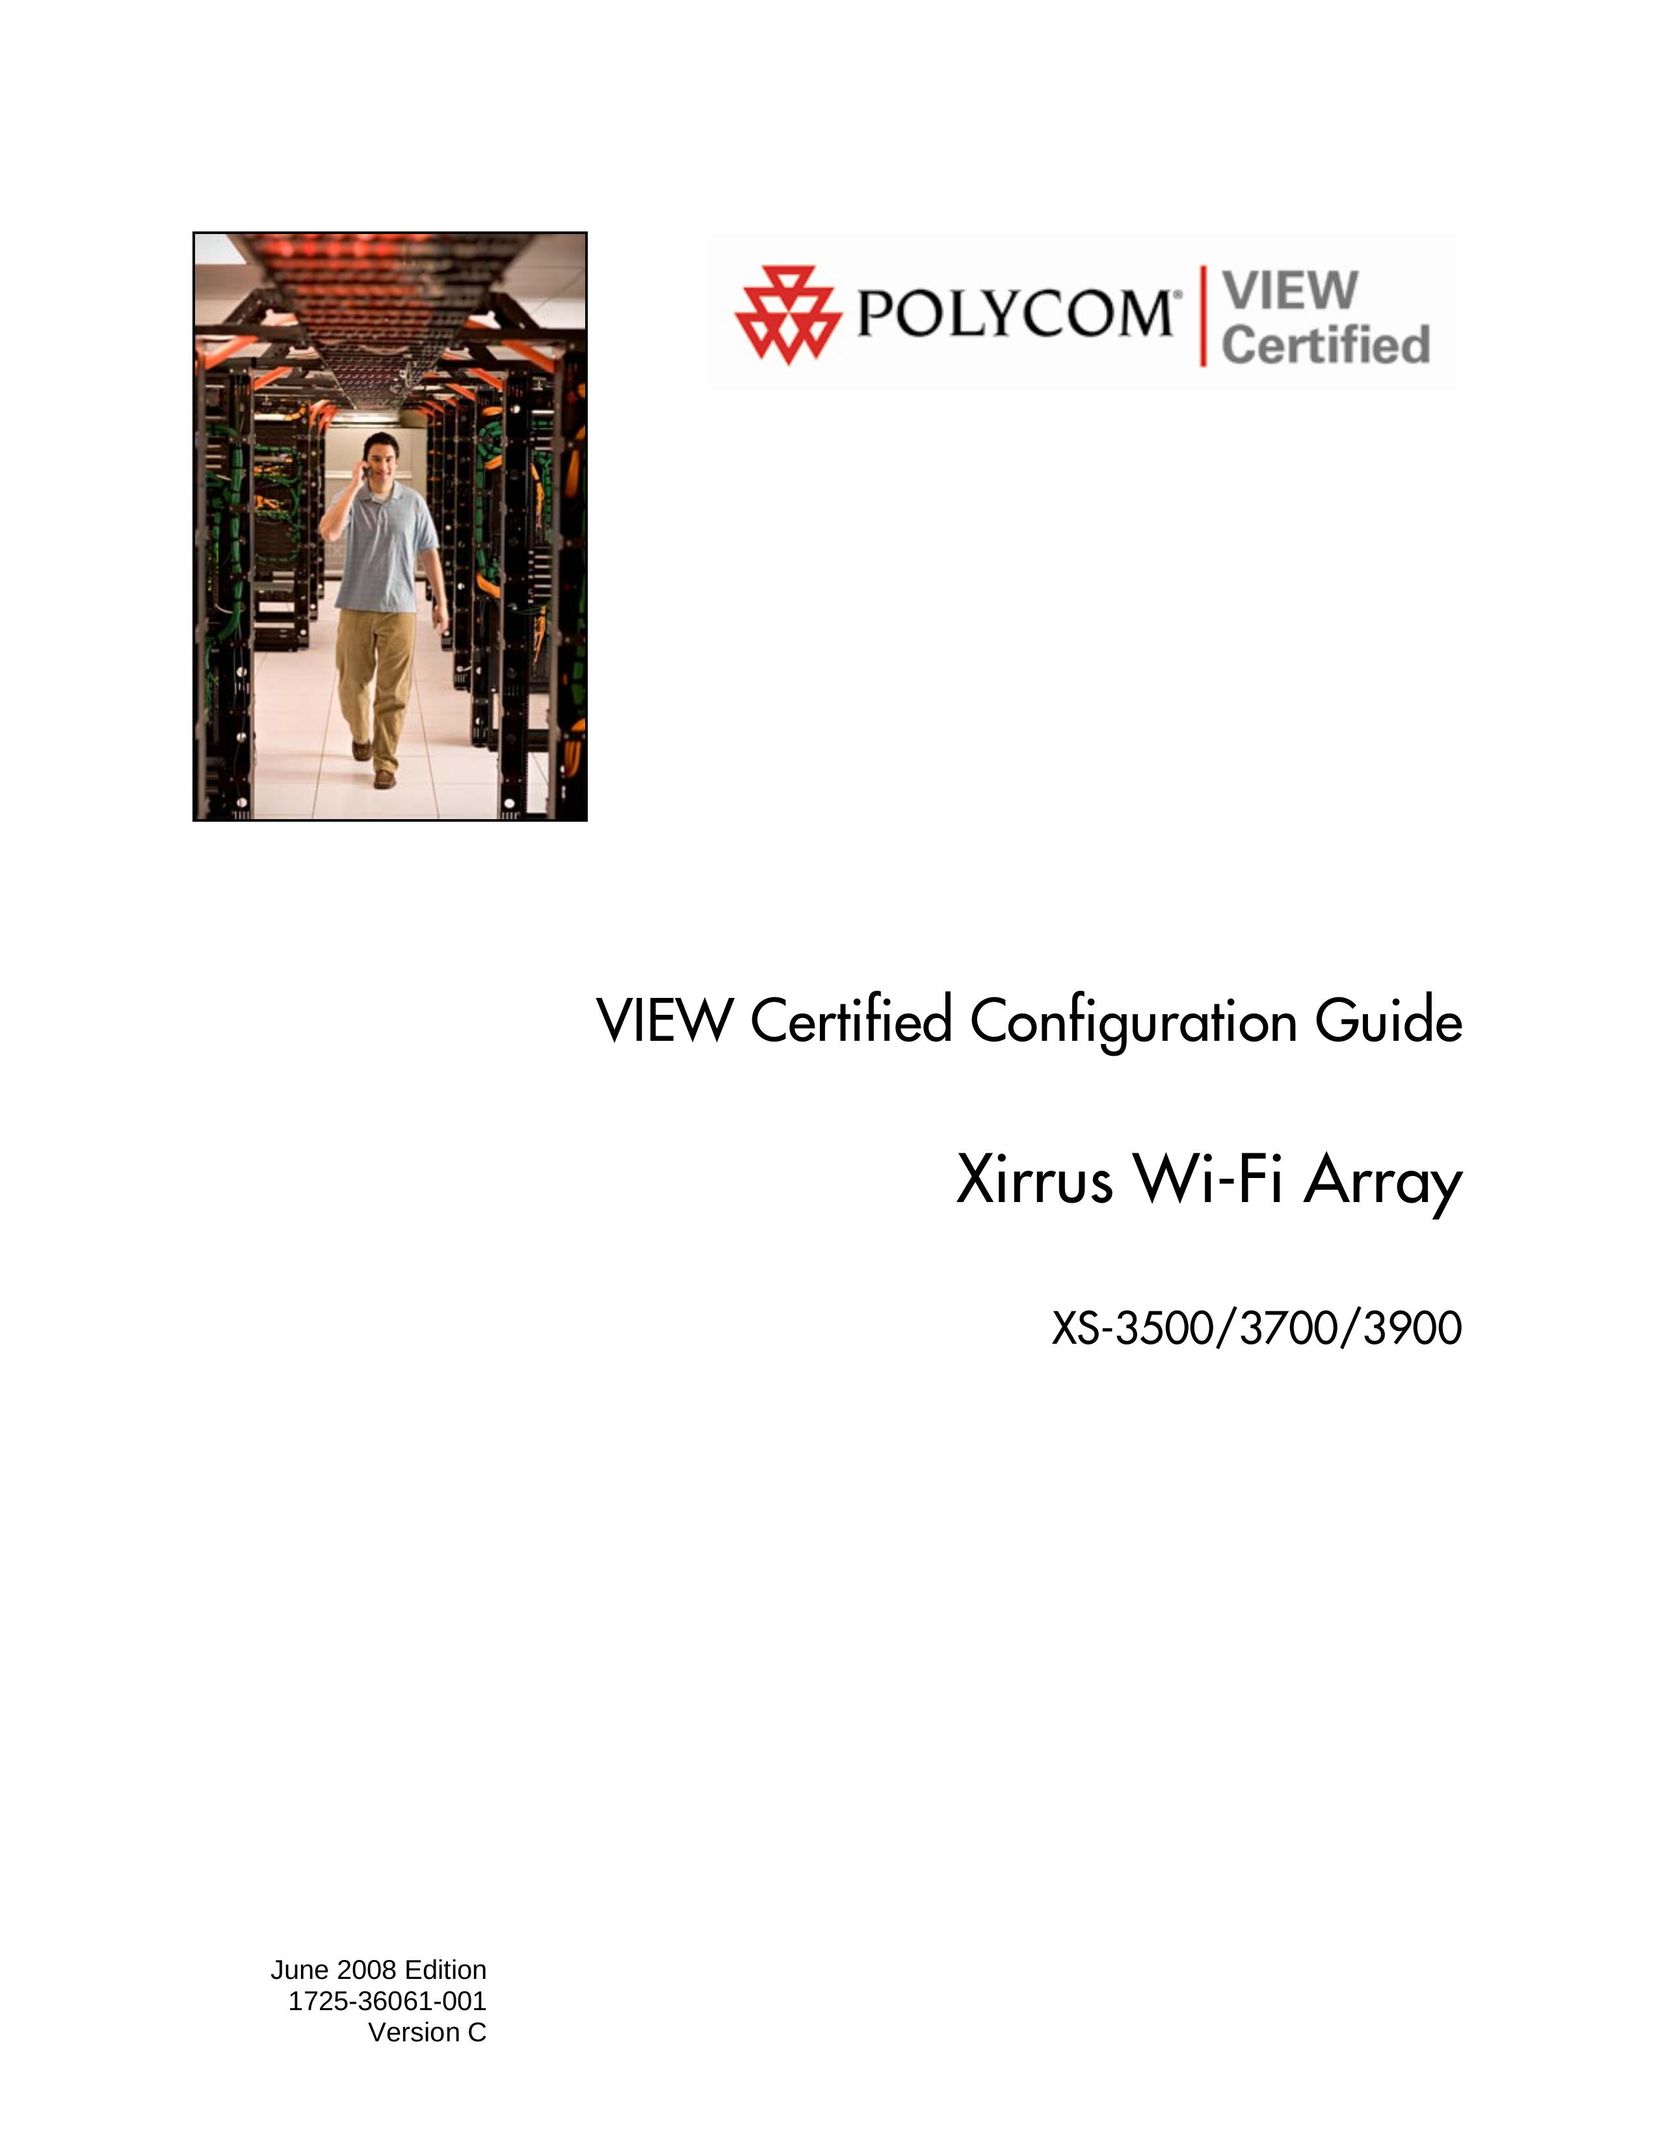 Polycom XS-3500 Network Router User Manual